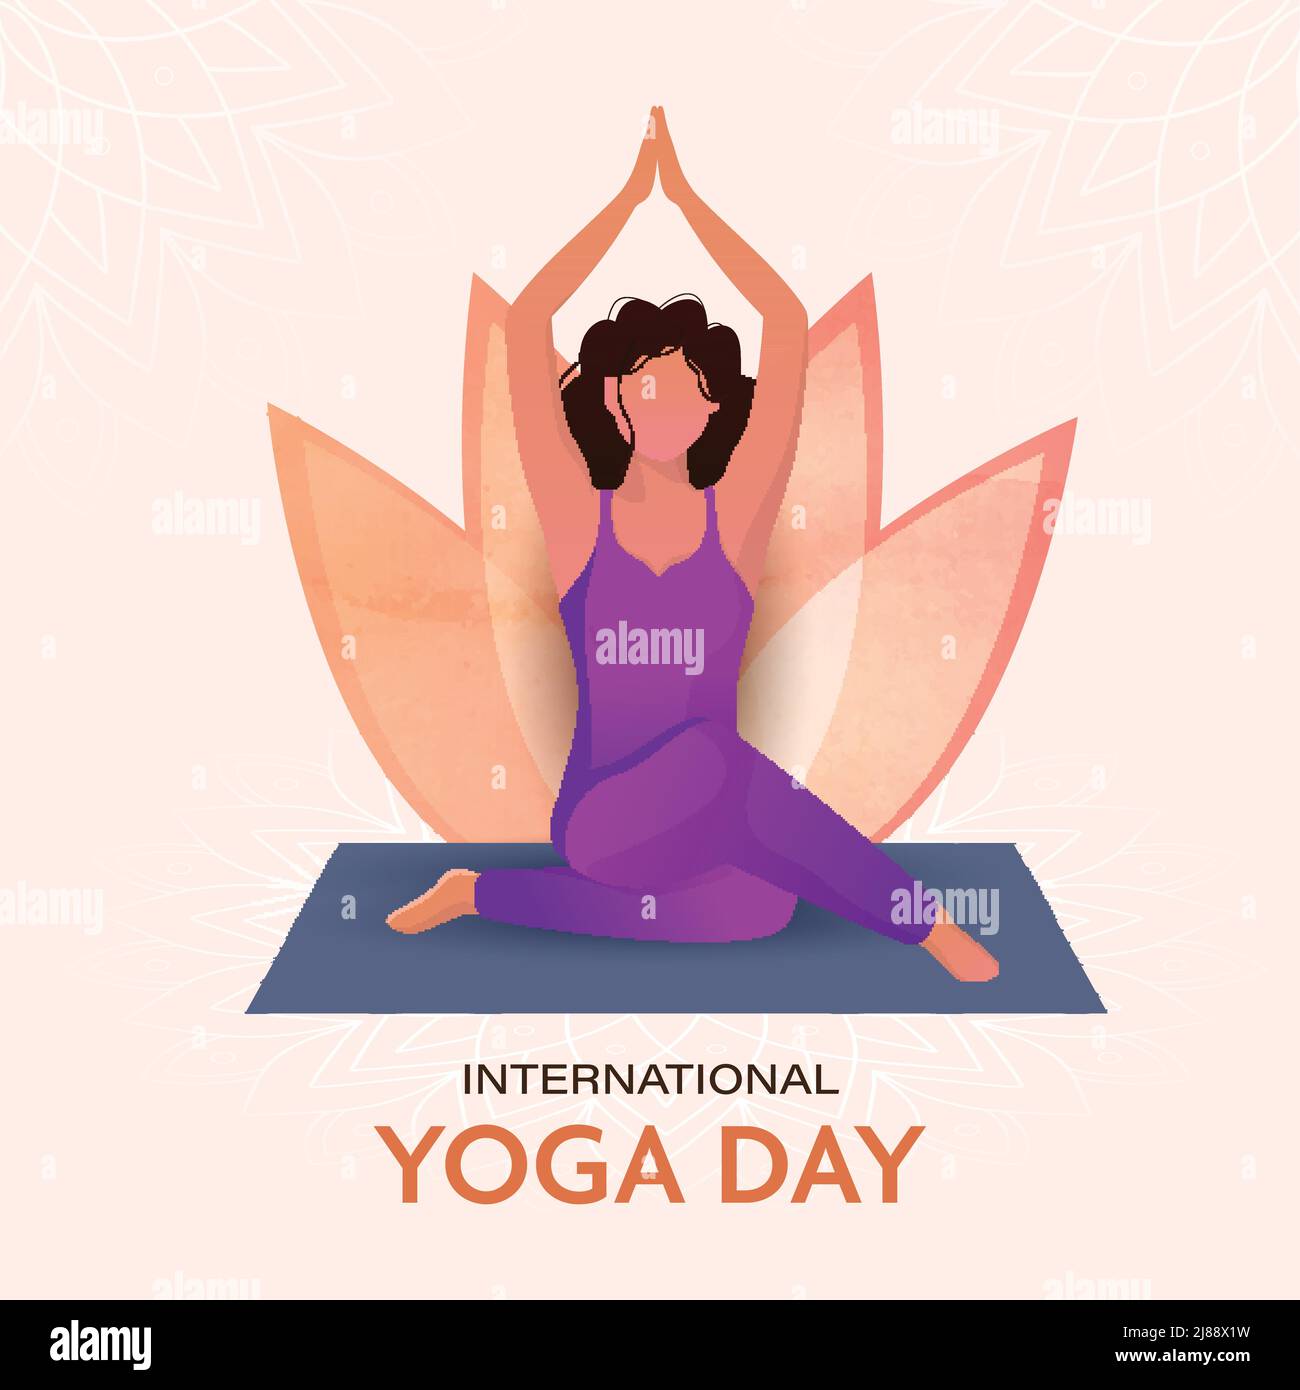 International Yoga Day Concept With Faceless Young Lady Practicing Yoga Sukhasana Pose And Lotus Flower On Pastel Peach Background. Stock Vector